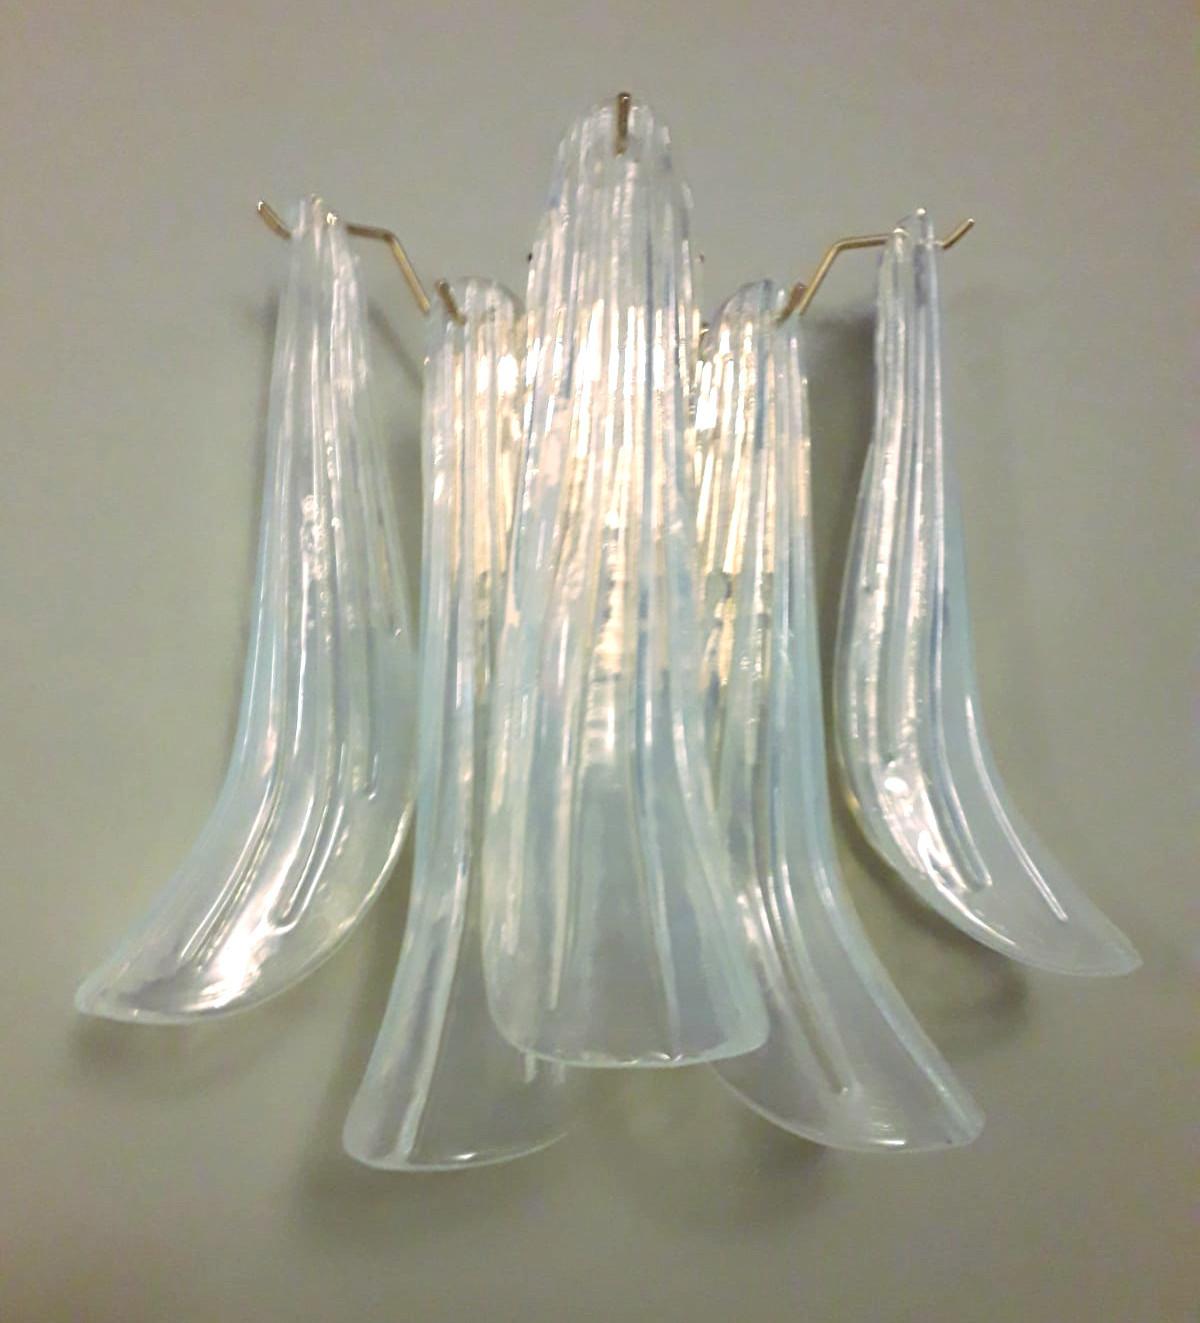 Pair of Italian wall lights with vintage iridescent opaline Murano banana glass petals mounted on newly made gold finish metal frames / Made in Italy
Measures: Height 13 inches, width 14.5 inches, depth 8 inches
2 lights / E12 or E14 type / max